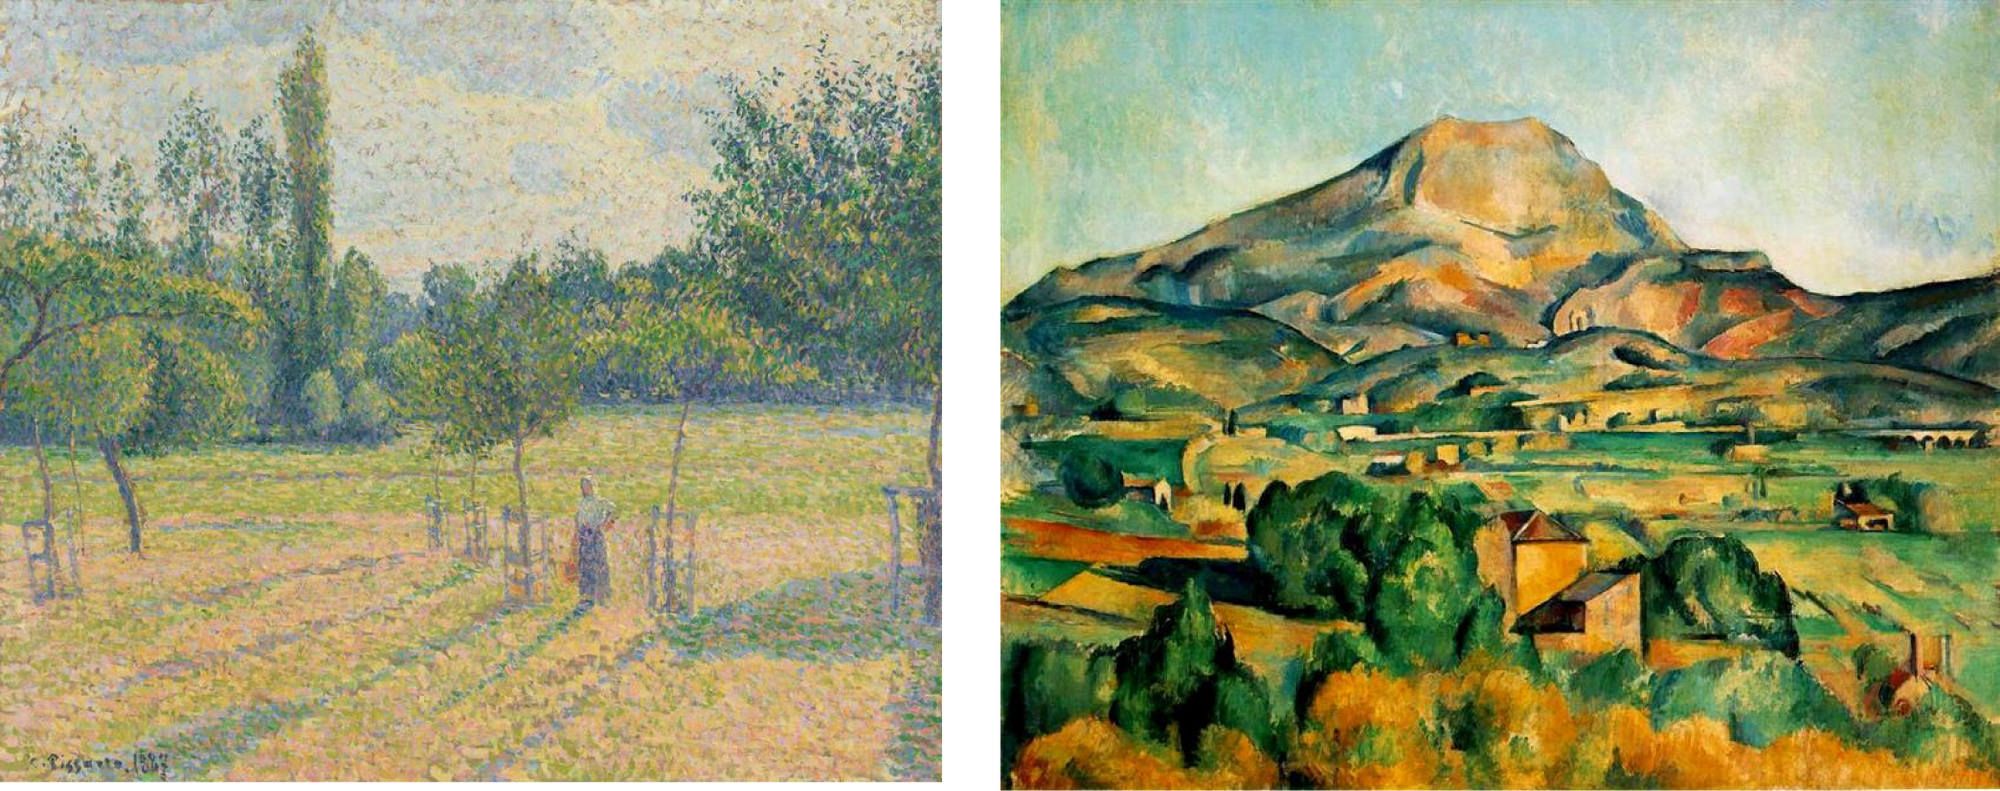 Late Afternoon in our Meadow - Camille Pissarro & Mont Sainte-Victoire - Paul Cezanne 